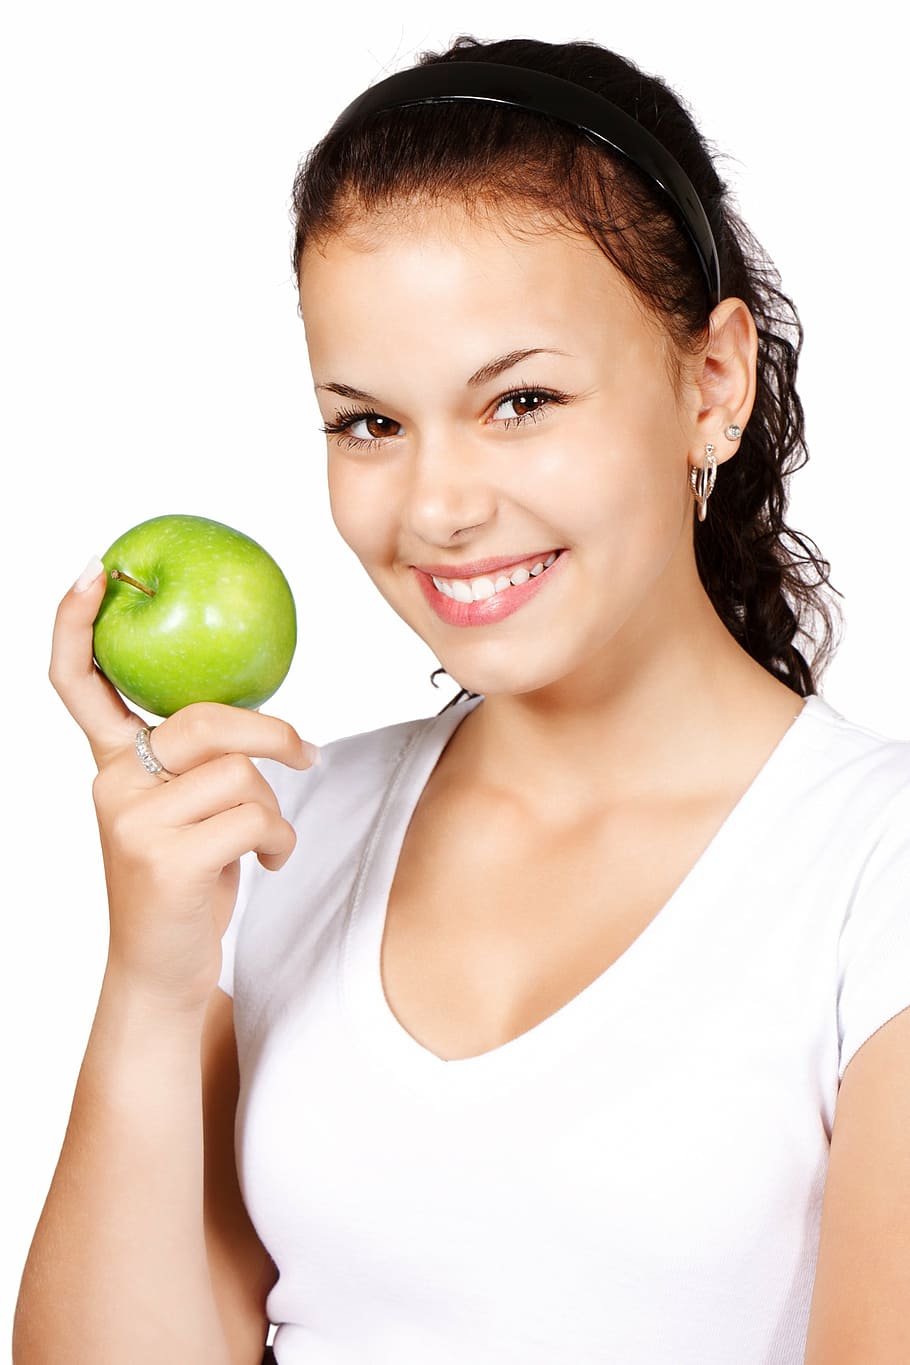 woman in white shirt holding green apple, diet, healthy, eating